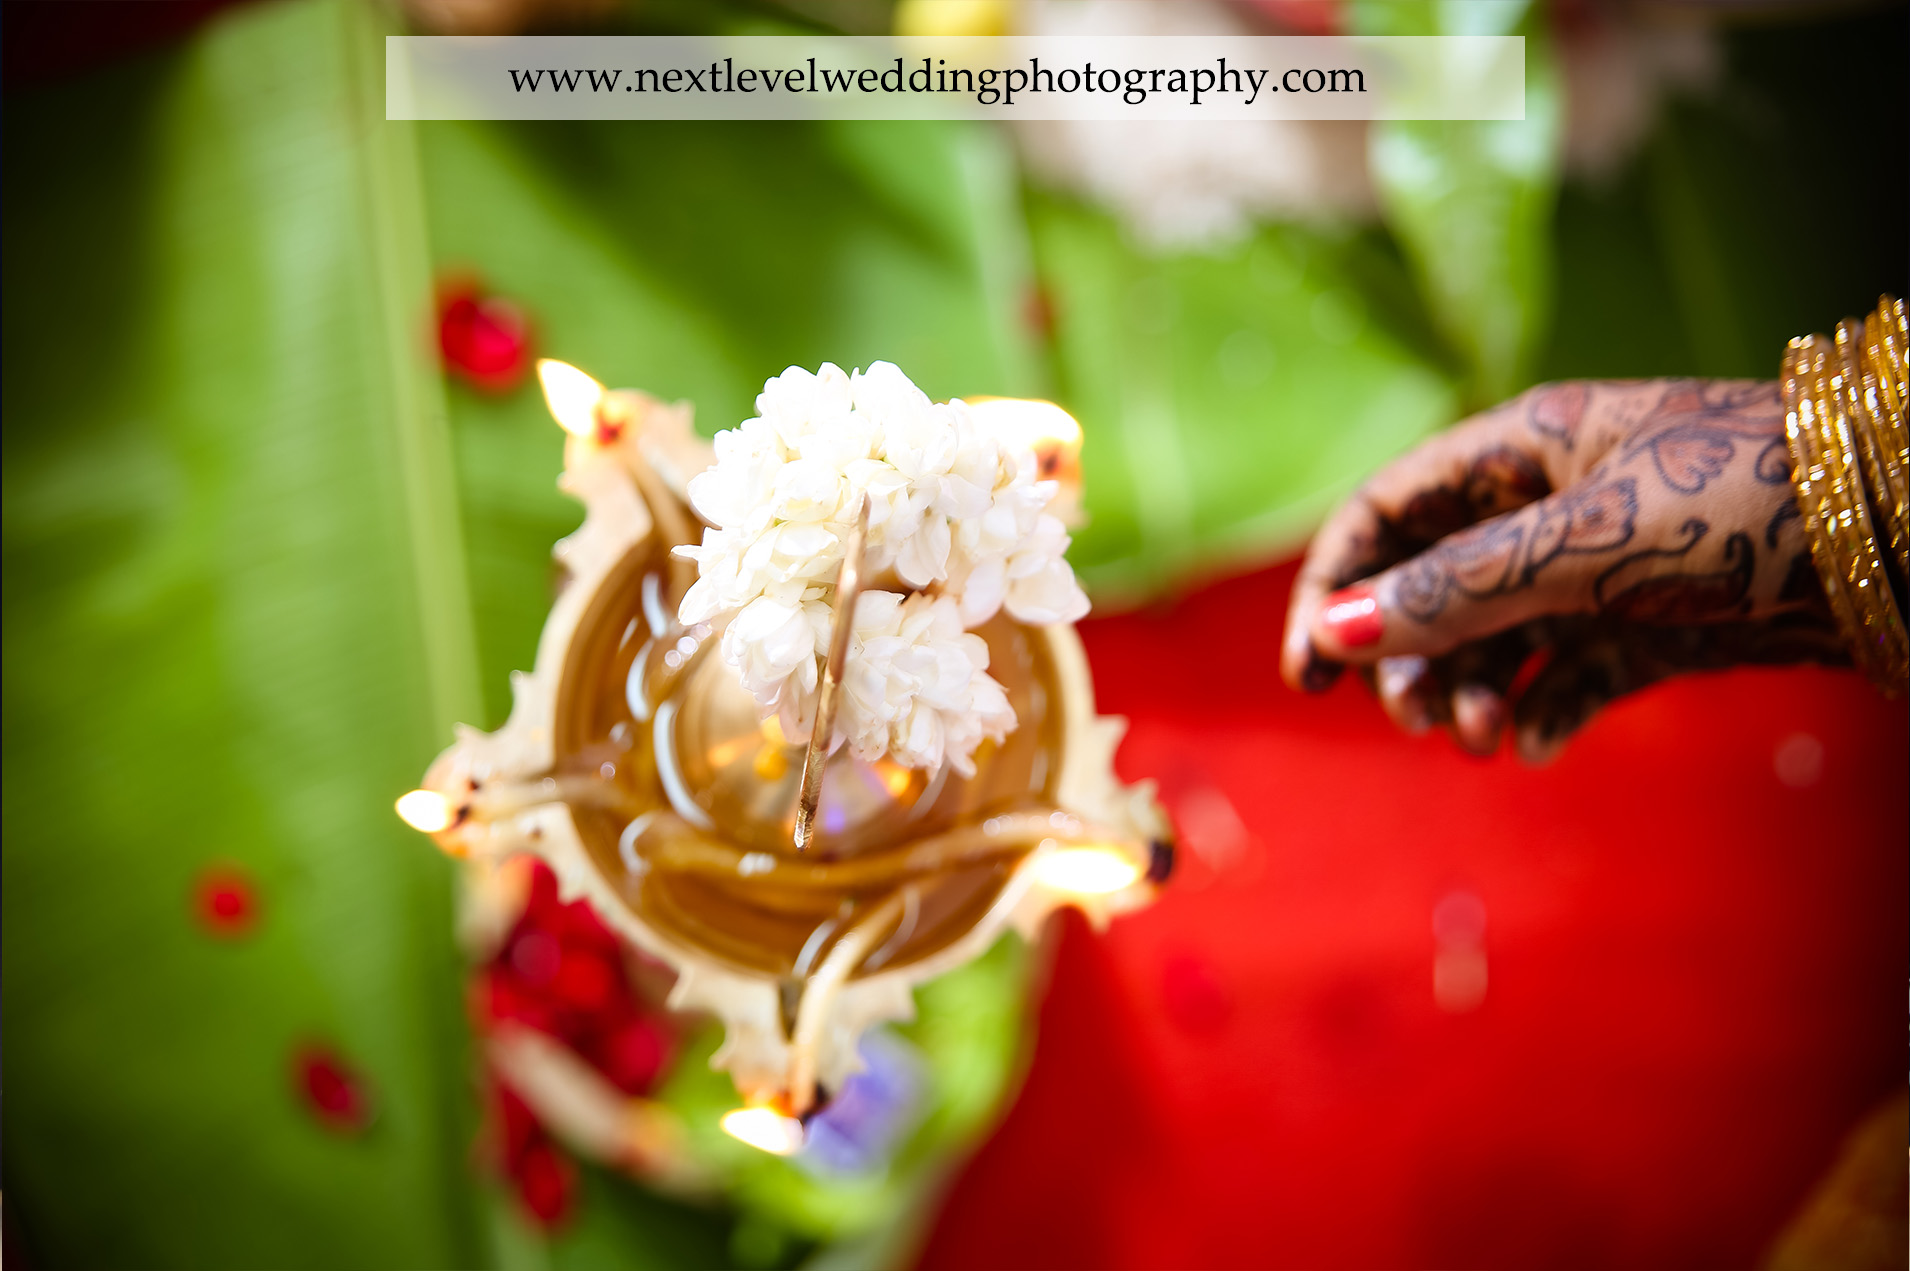 Candid wedding photography in Coimbatore